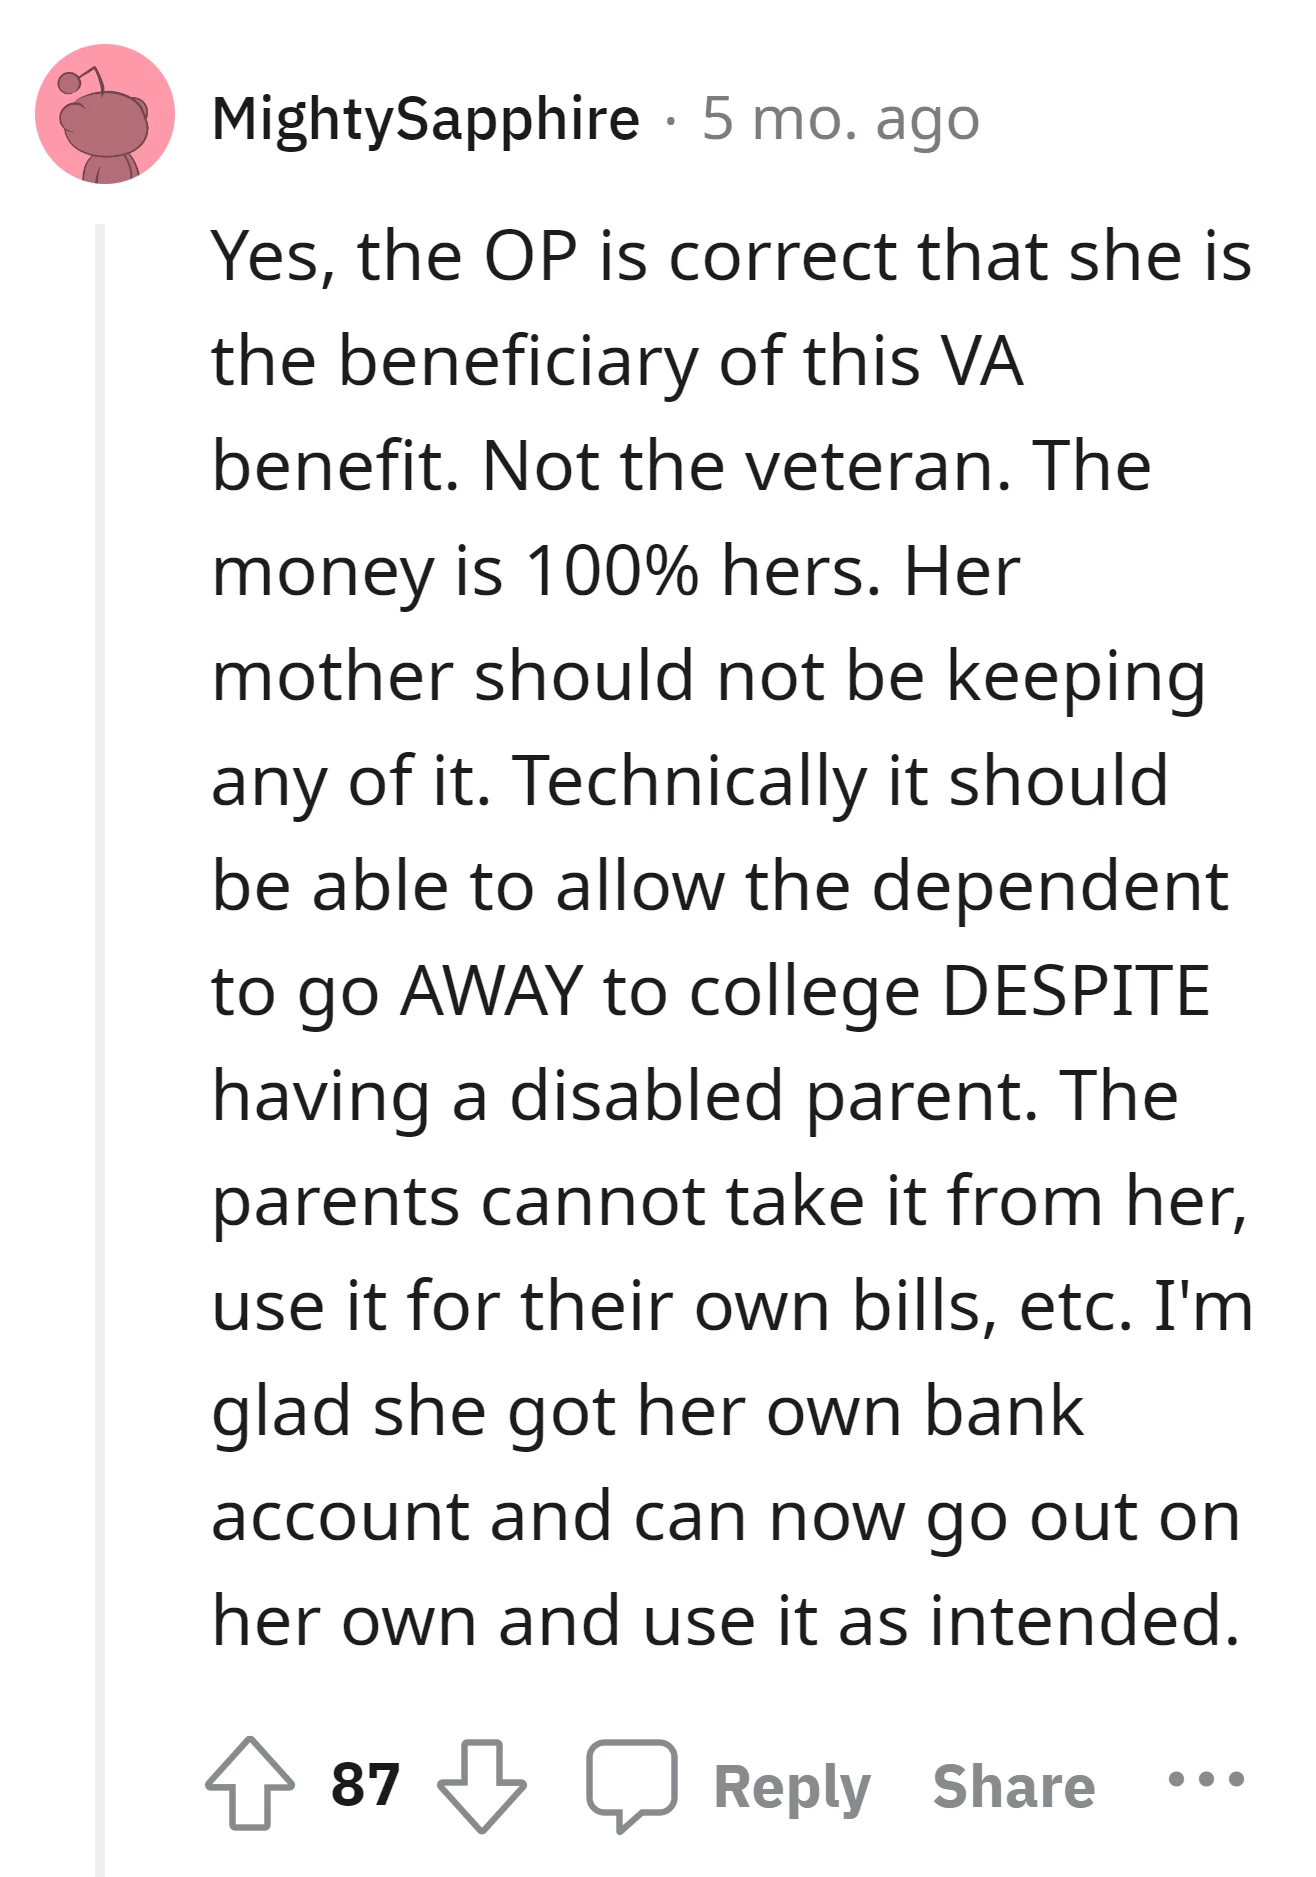 OP rightfully owns the VA benefit money